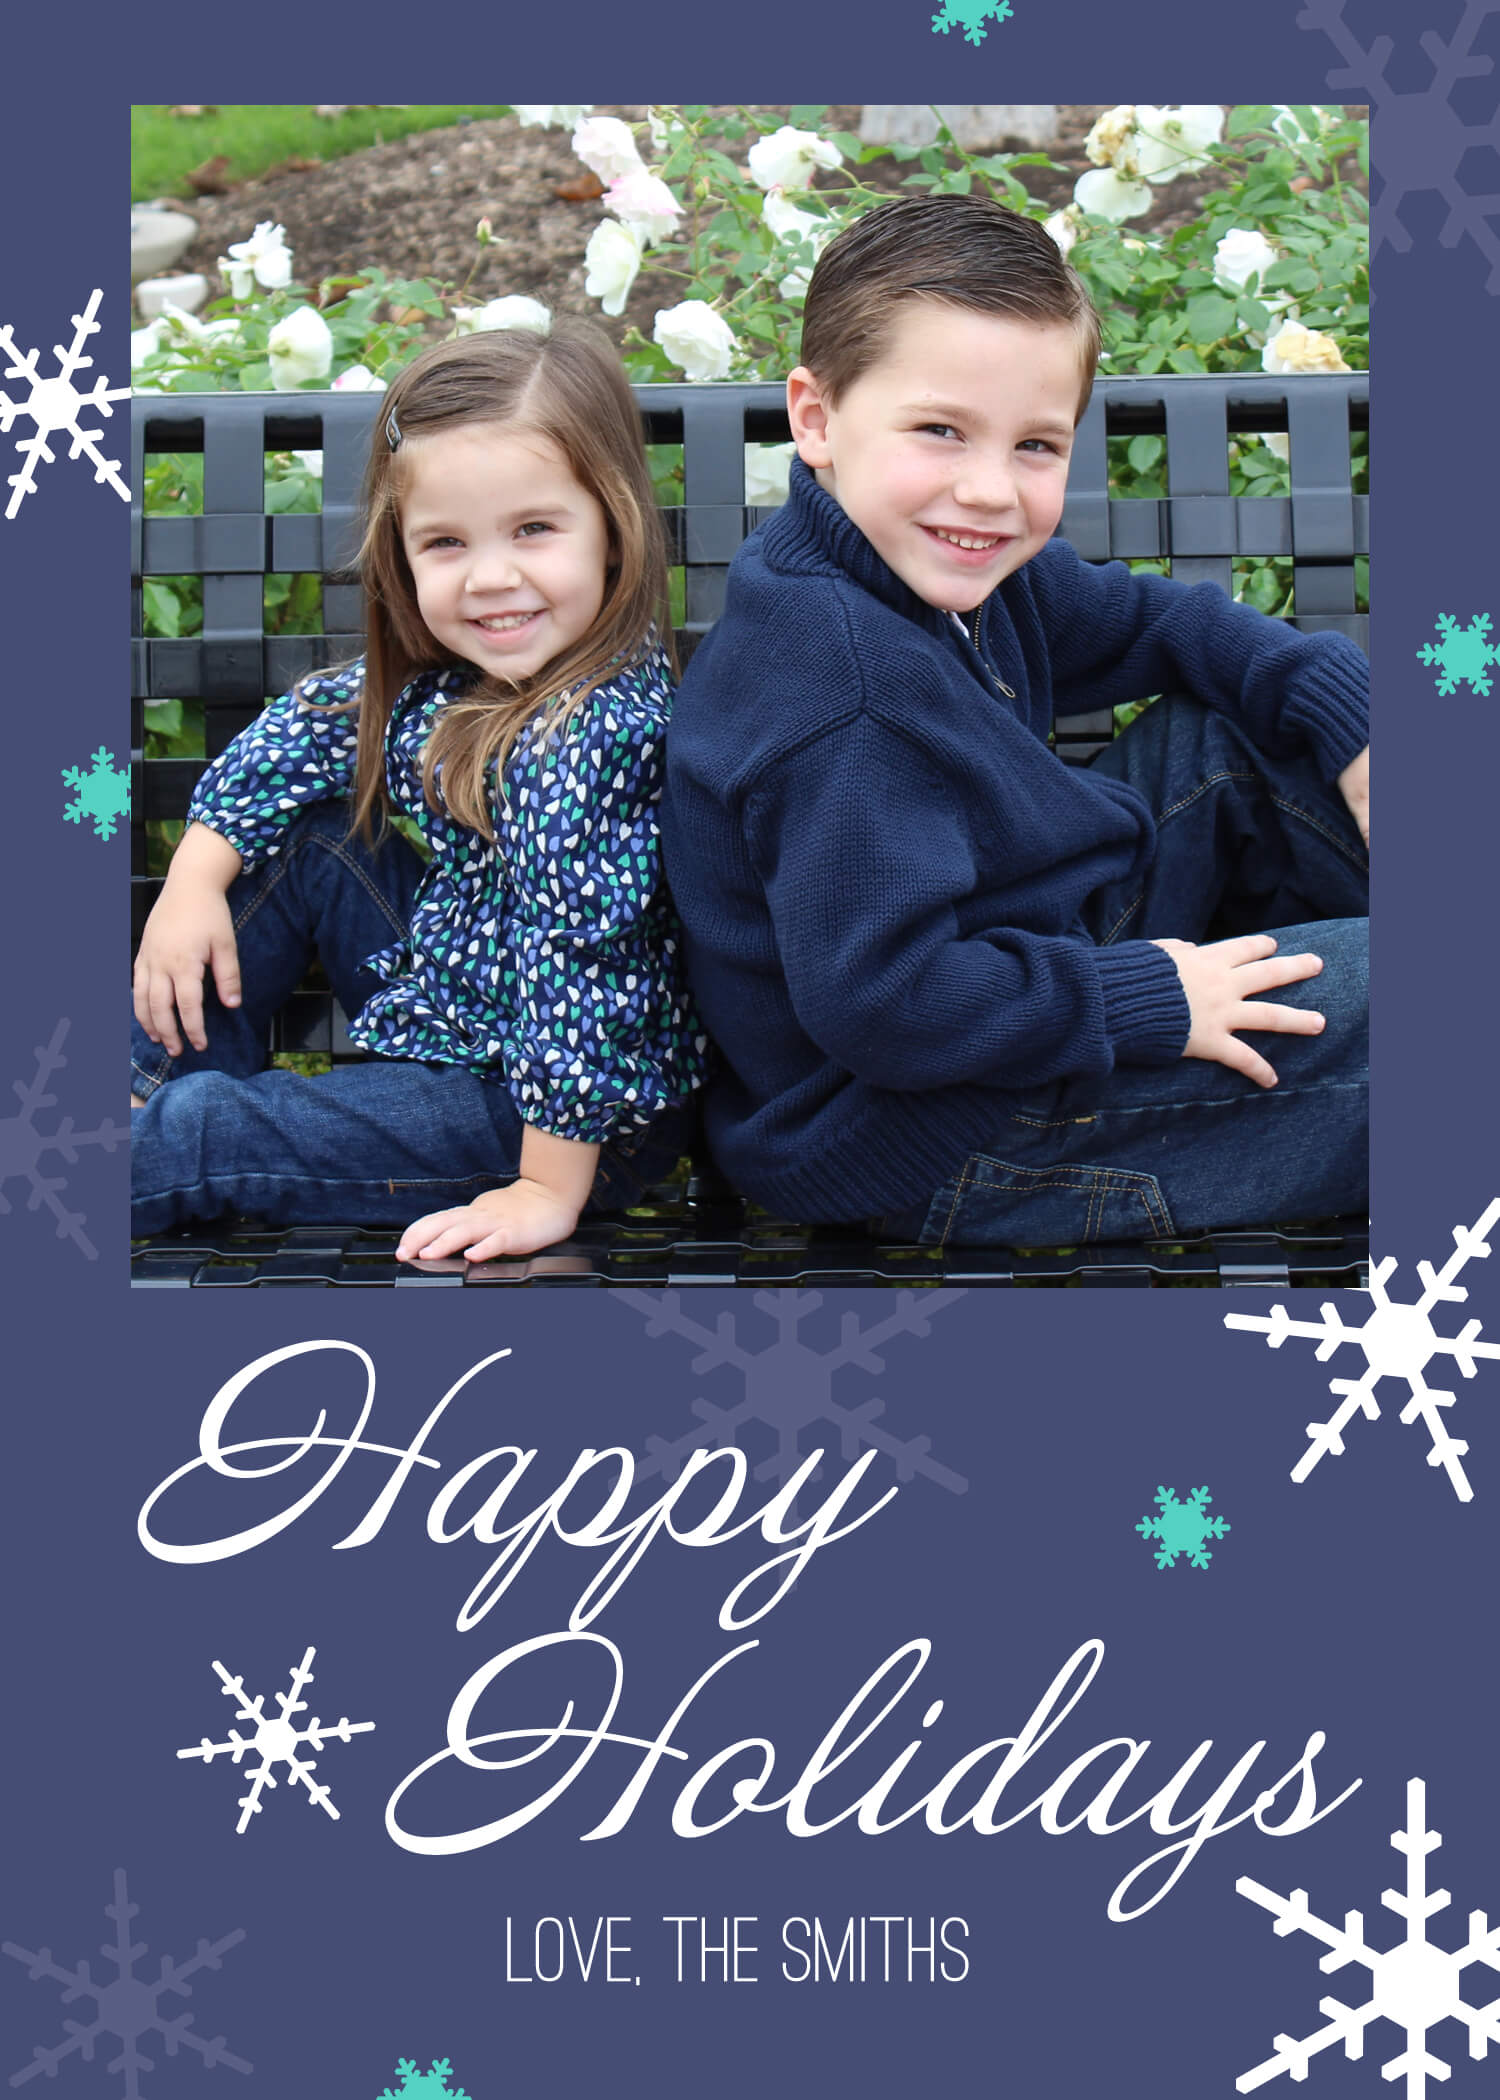 Holiday Photo Card & Pixlr Video Tutorial – Designer Blogs Intended For Free Holiday Photo Card Templates